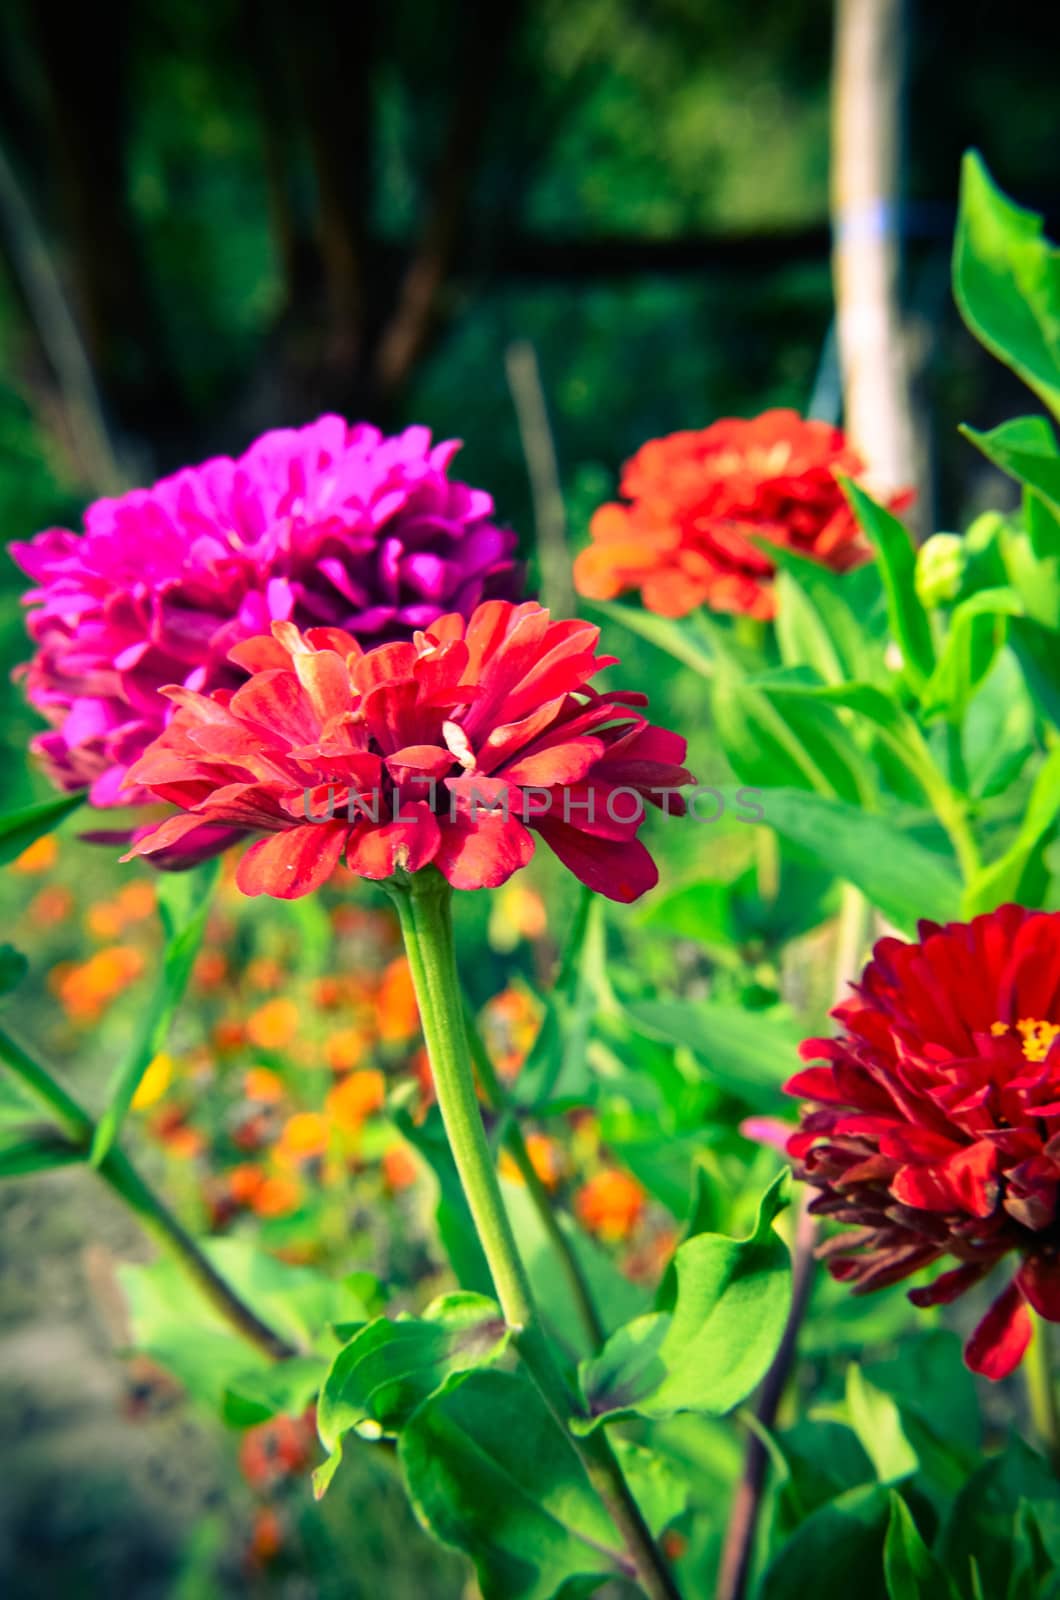 Colorful zinnia flowers in the garden by kimbo-bo